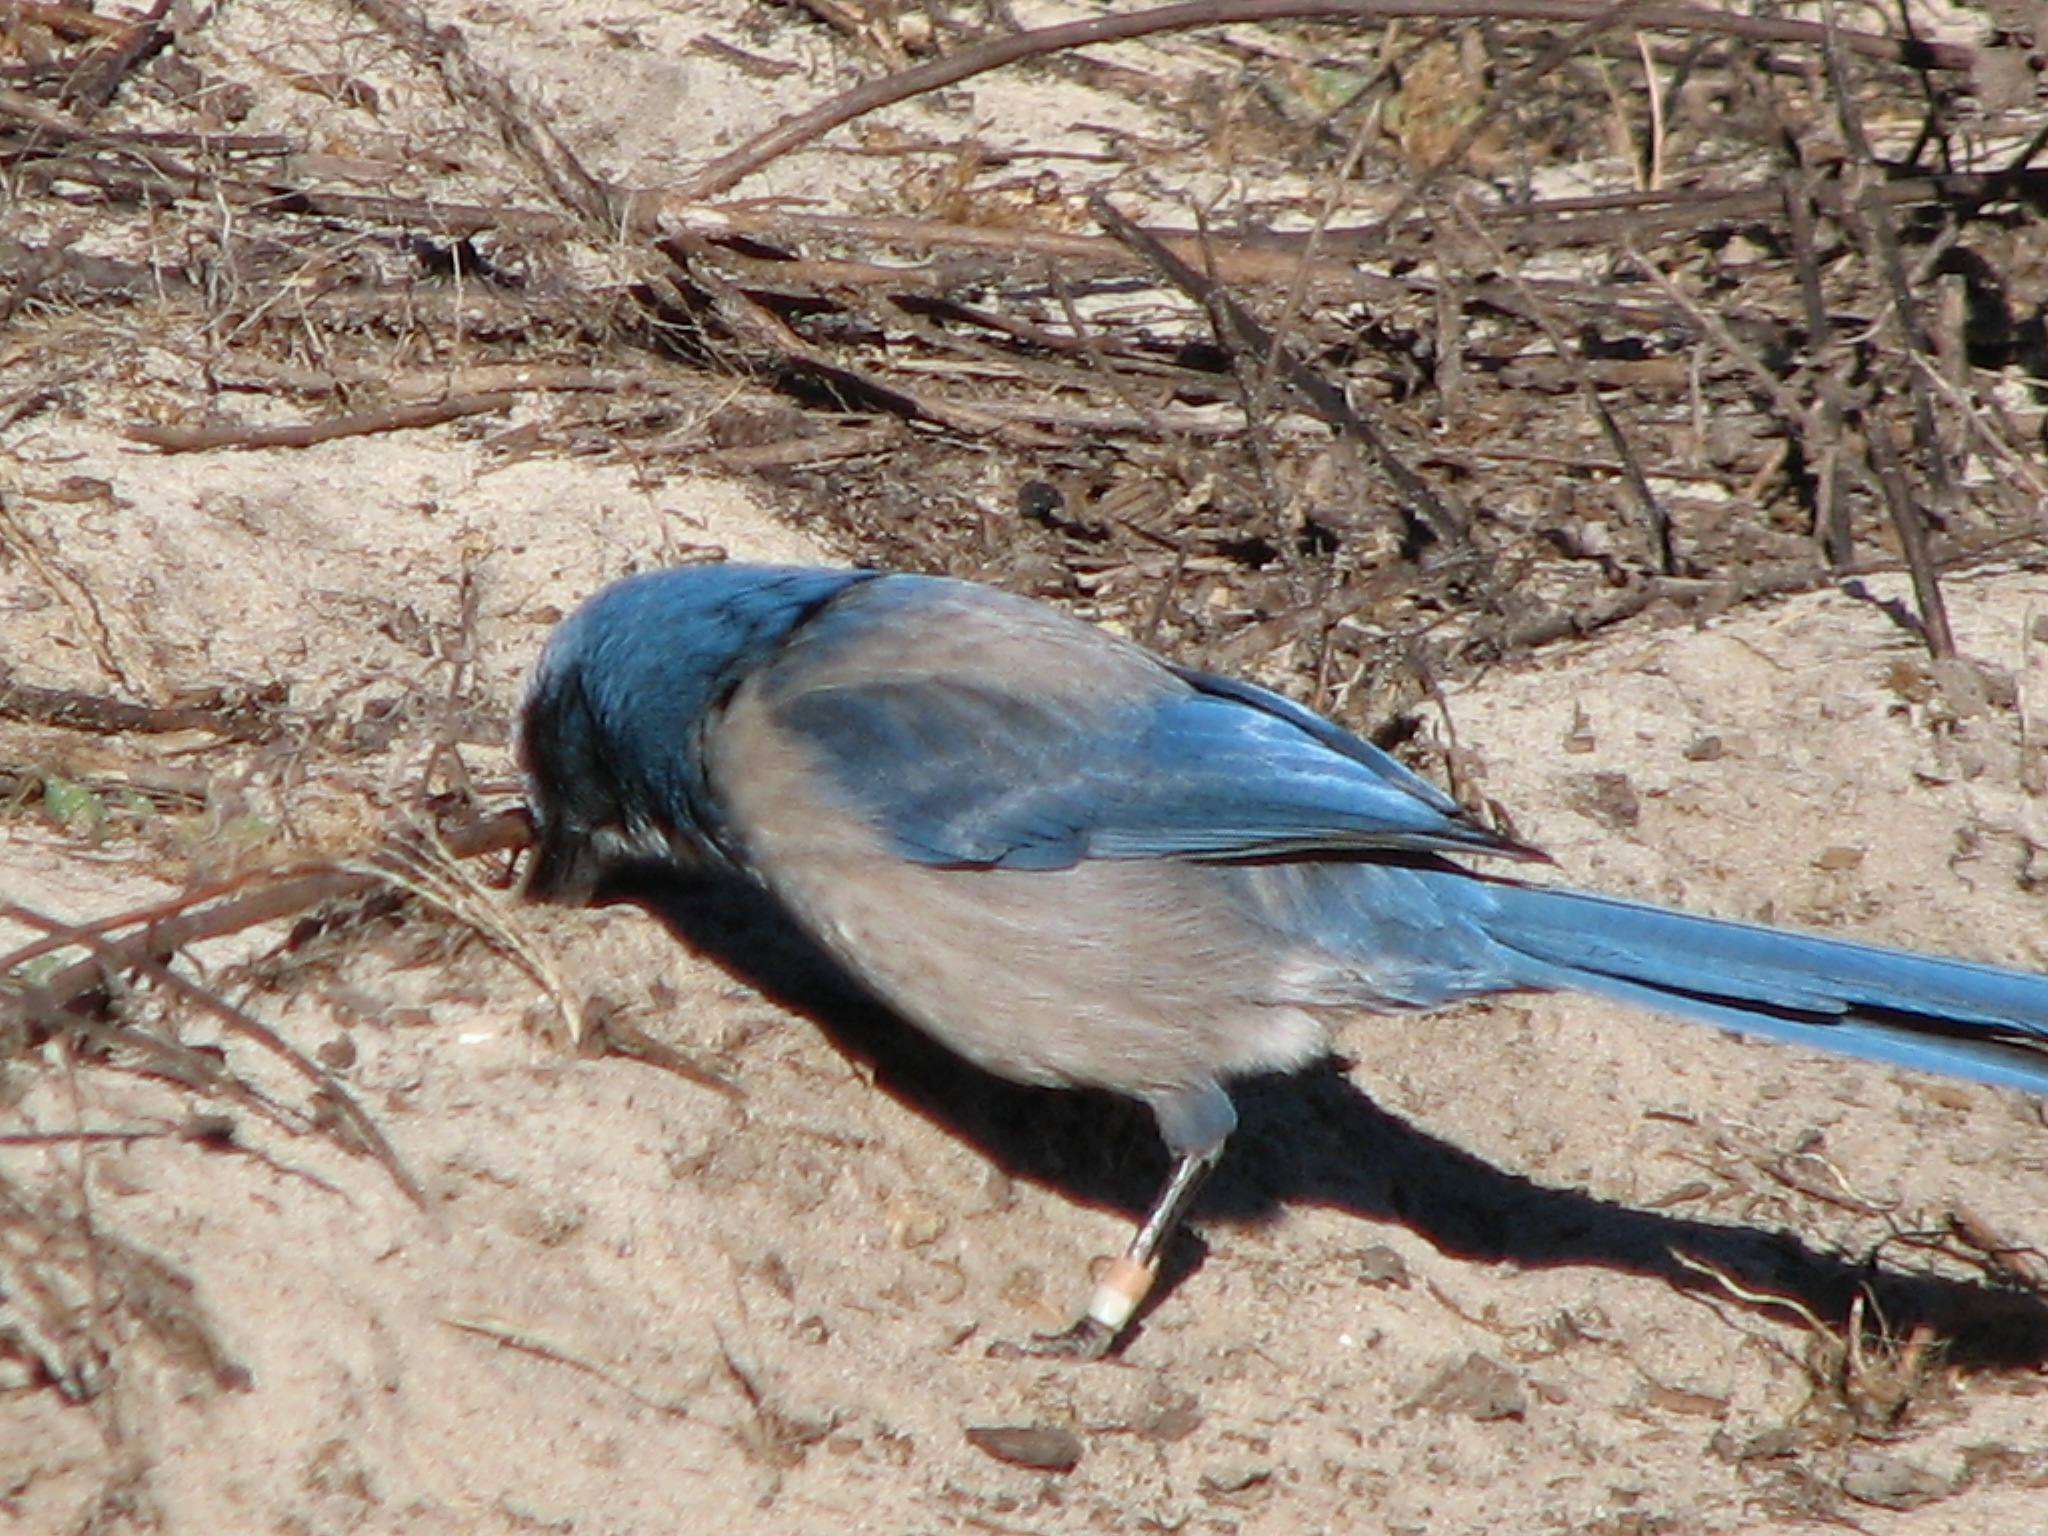 A banded Florida scrub-jay caching acorns in the sand to save for later. They can bury up to 5,000 acorns or more per bird each fall and then live off their stores all winter. 